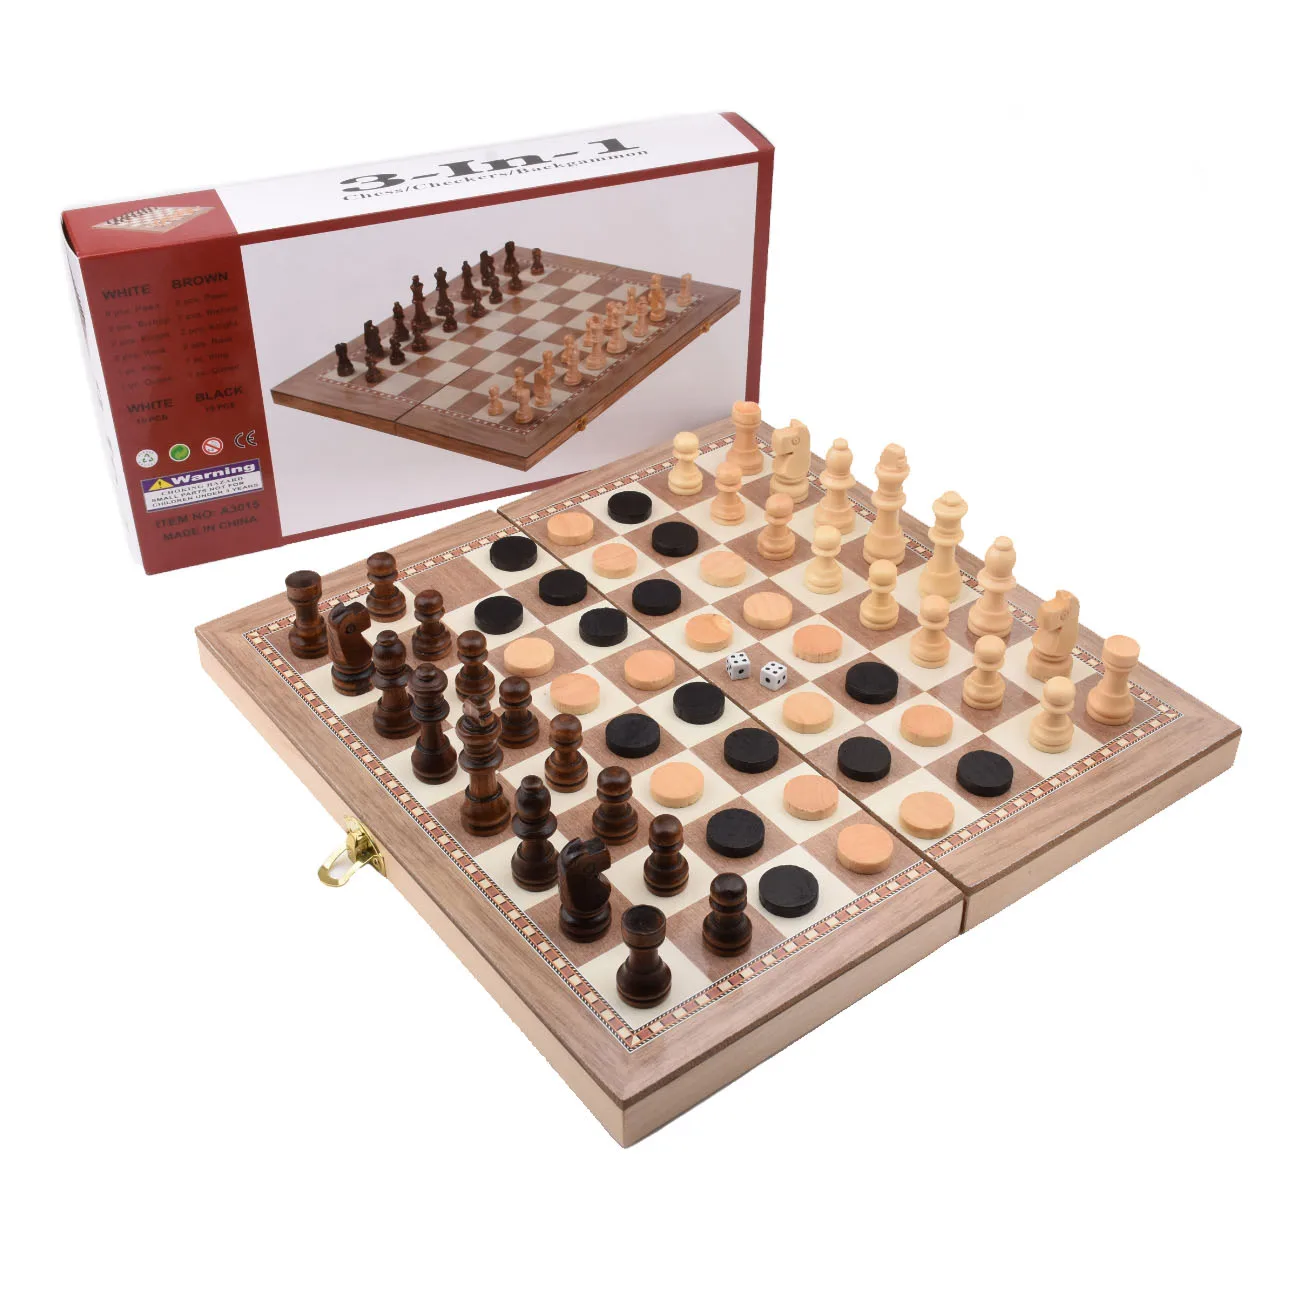 

3-in-1 Wooden Staunton Chess Set with Foldable board Pieces For Kids Teens Adults Storage Slot & boxs Checkers, Brown